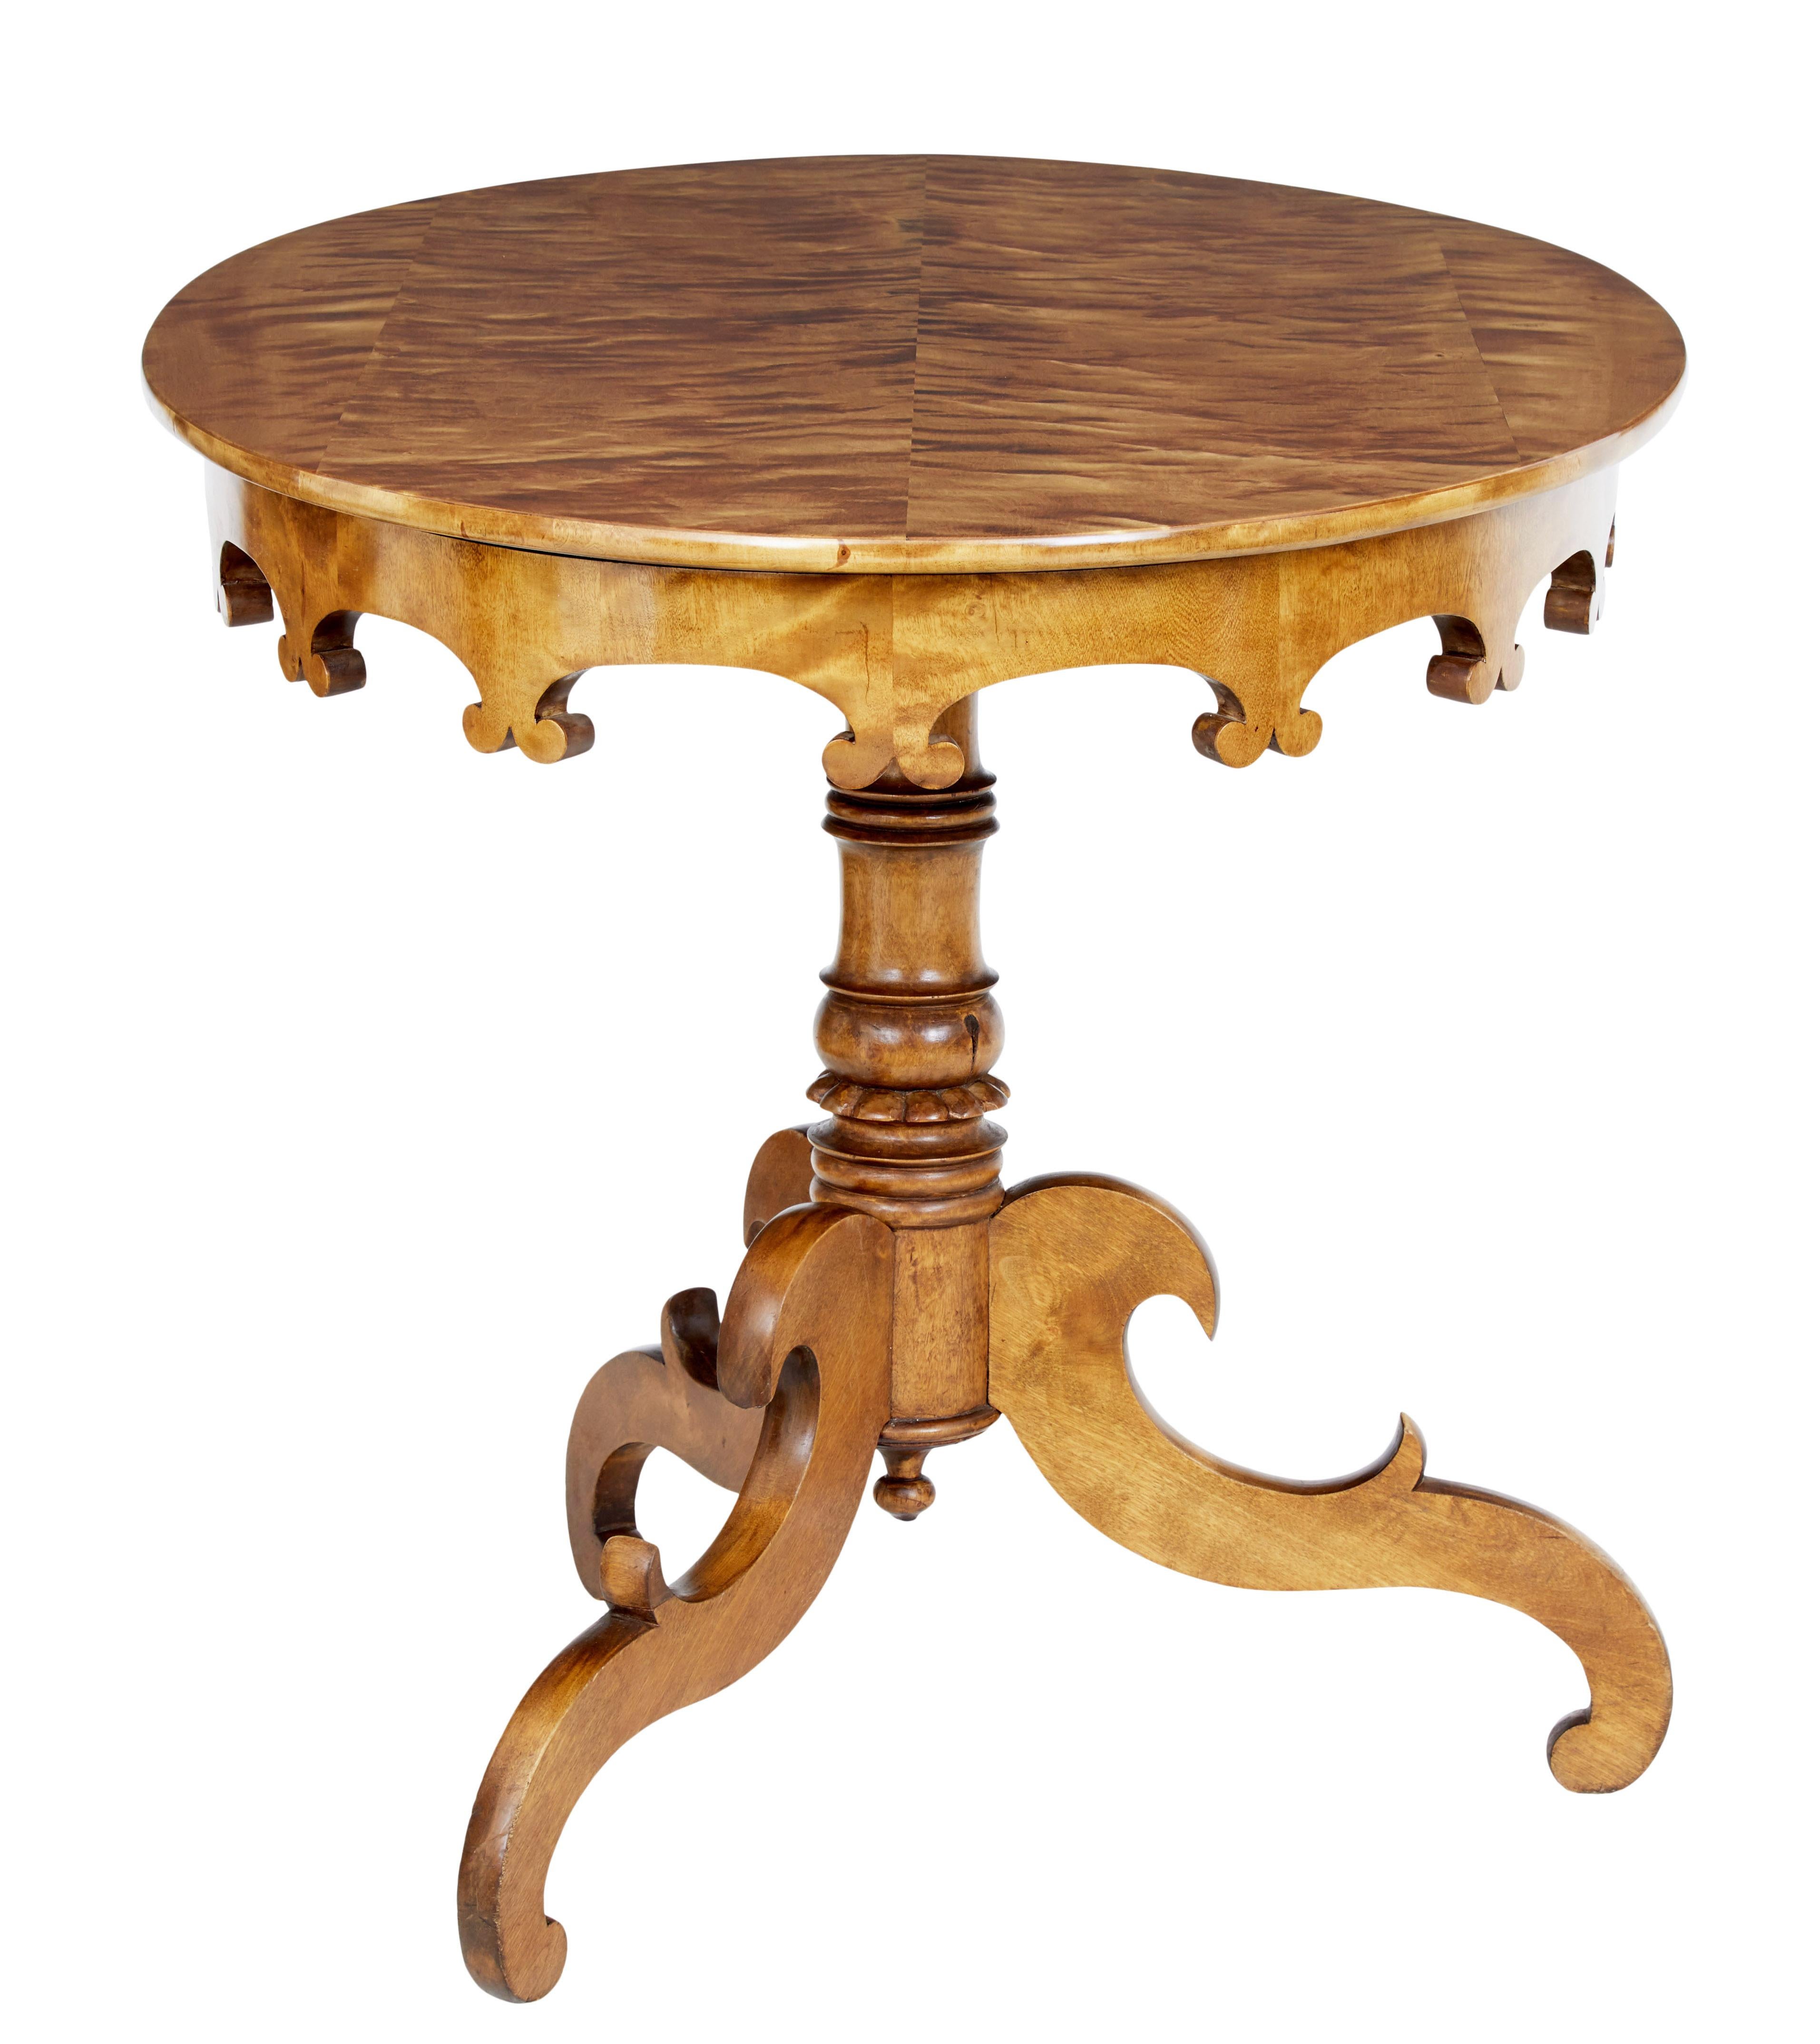 Swedish 19th century burr birch oval occasional table, circa 1890.

Good quality birch oval table with striking veneered top. Oval shape lends it to be able to be used as a lamp/side or center table.

Shaped decorative frieze. Standing on a